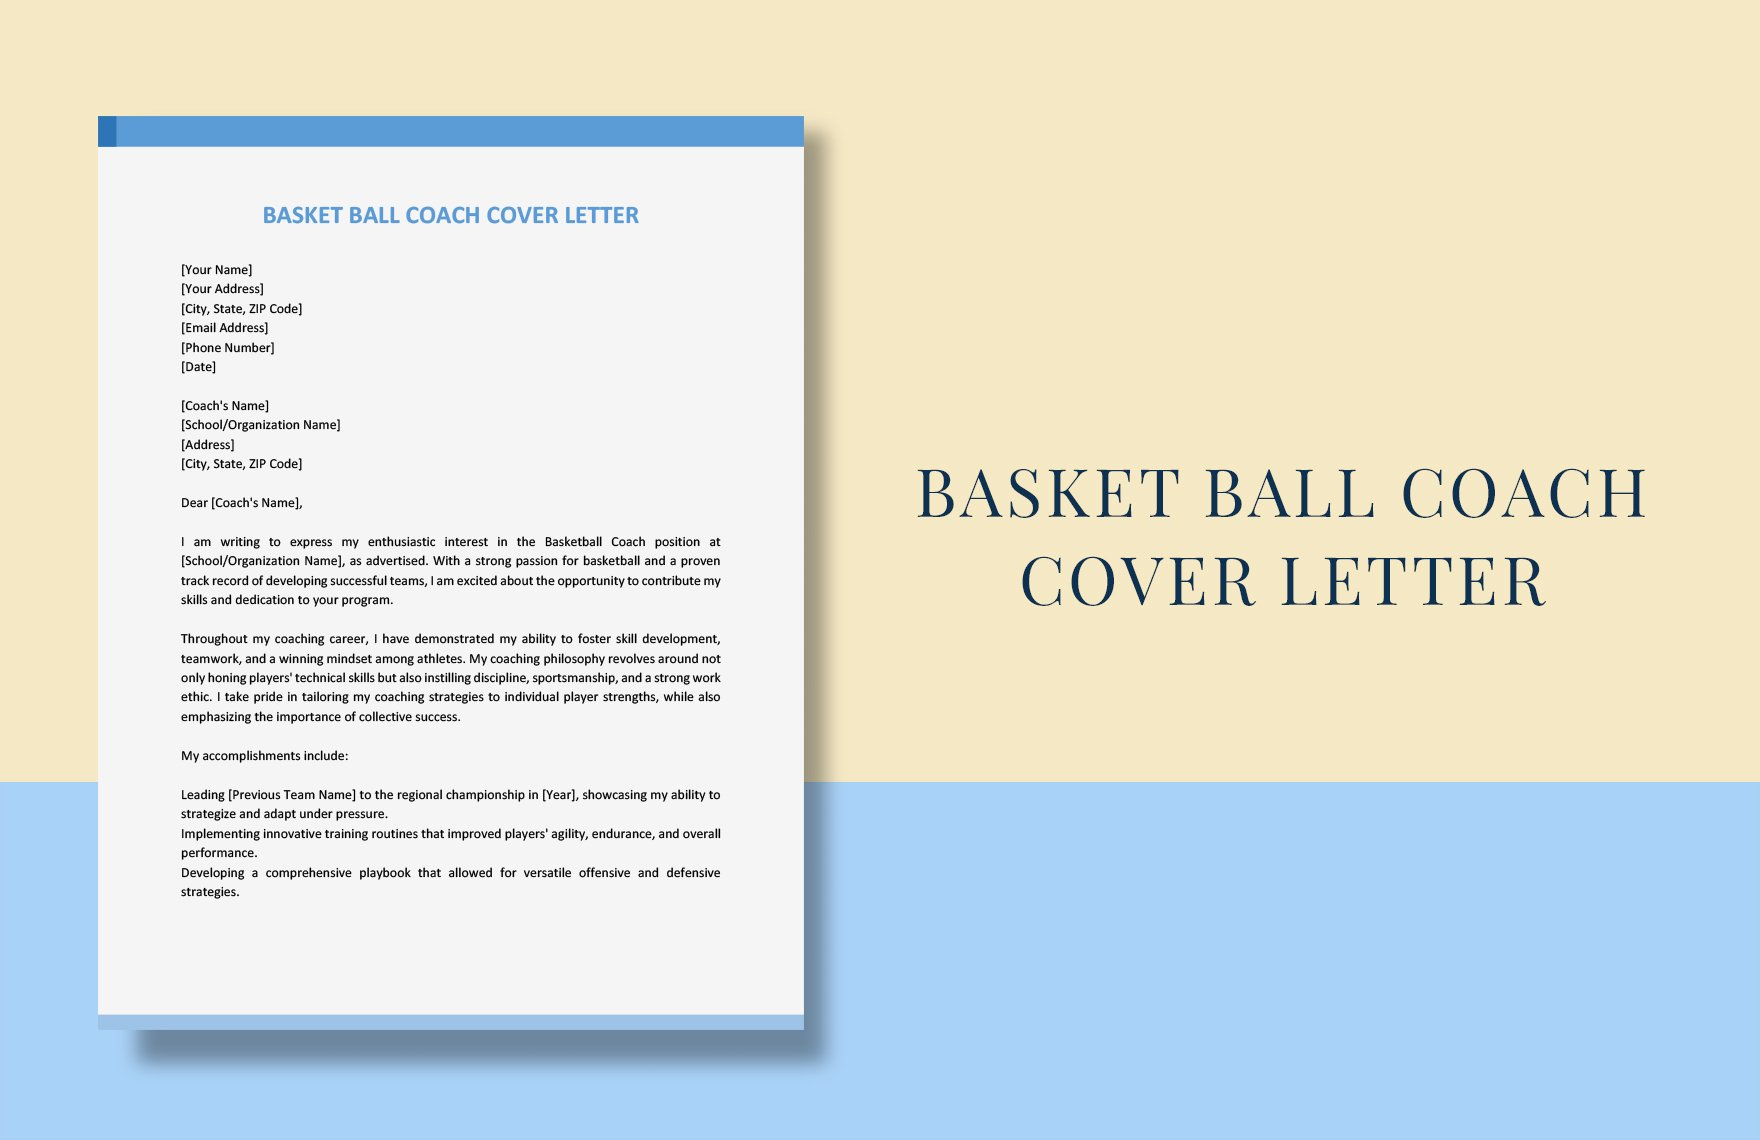 Basketball Coach Cover Letter in Word, Google Docs, PDF